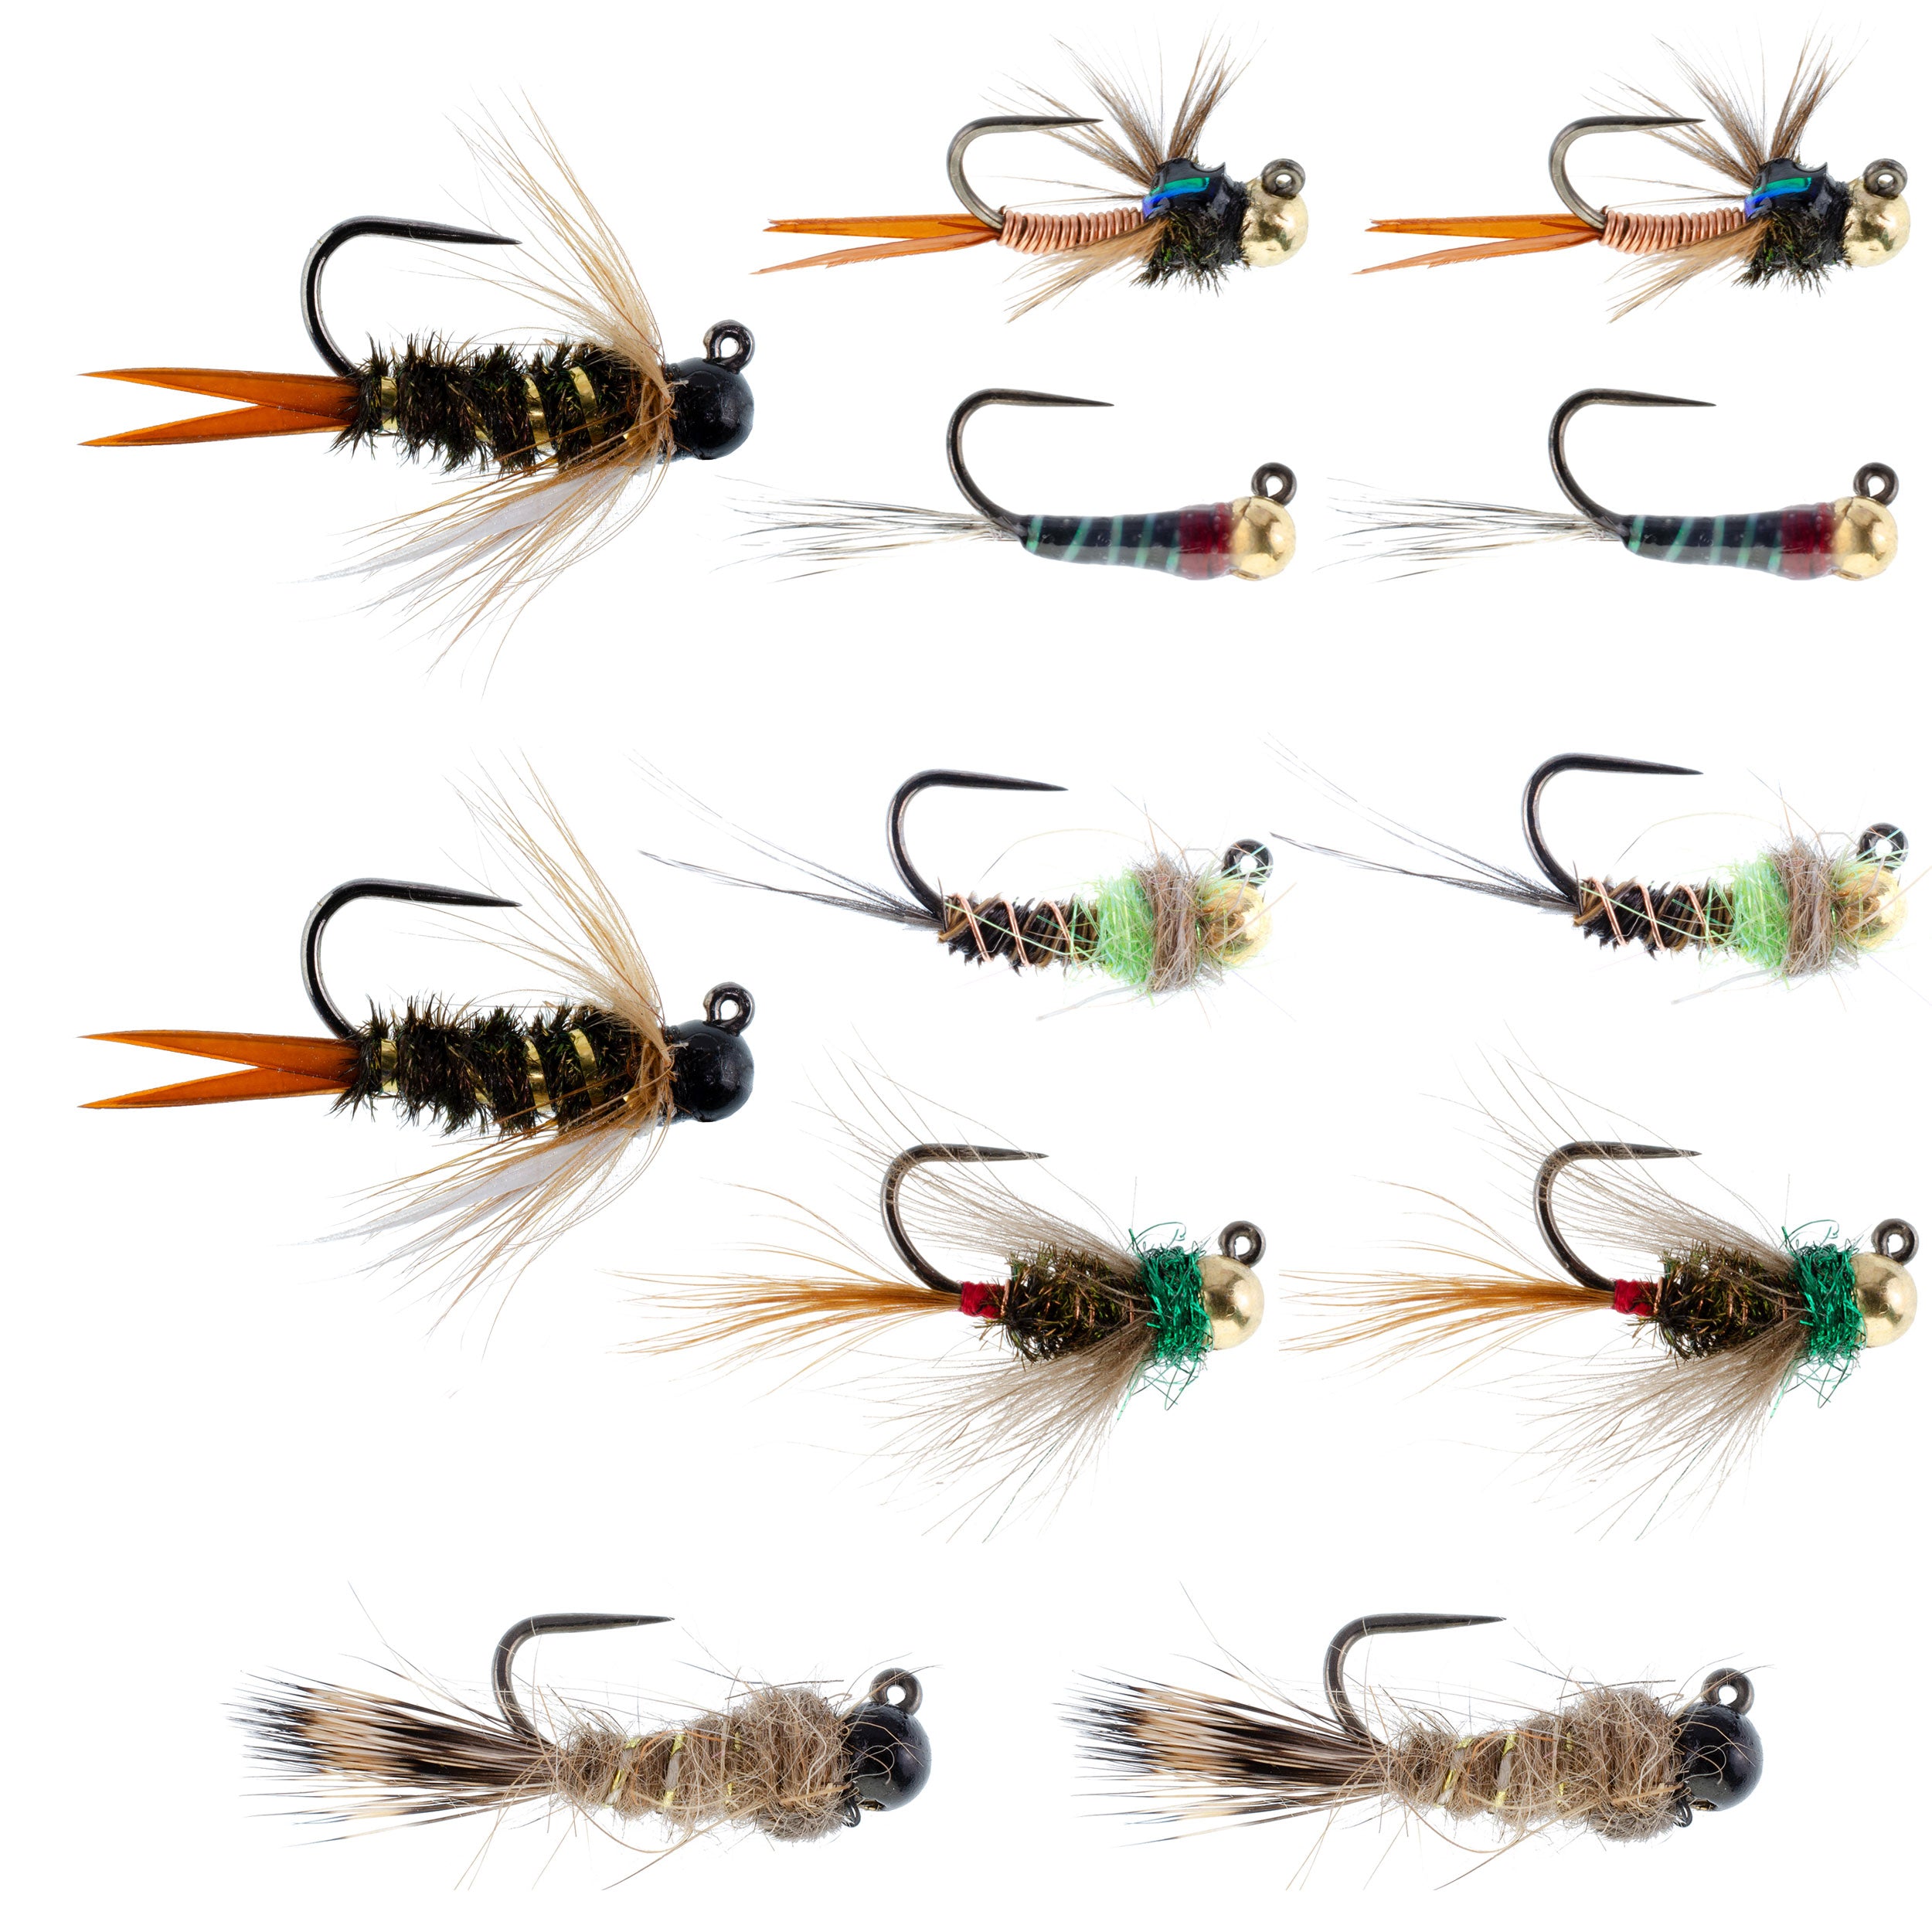 Tactical Czech Nymph Fly Fishing Flies Collection - One Dozen Tungsten Bead Euro Nymphing Fly Assortment - 2 Each of 6 Patterns - Hook Sizes 12, 14 and 16